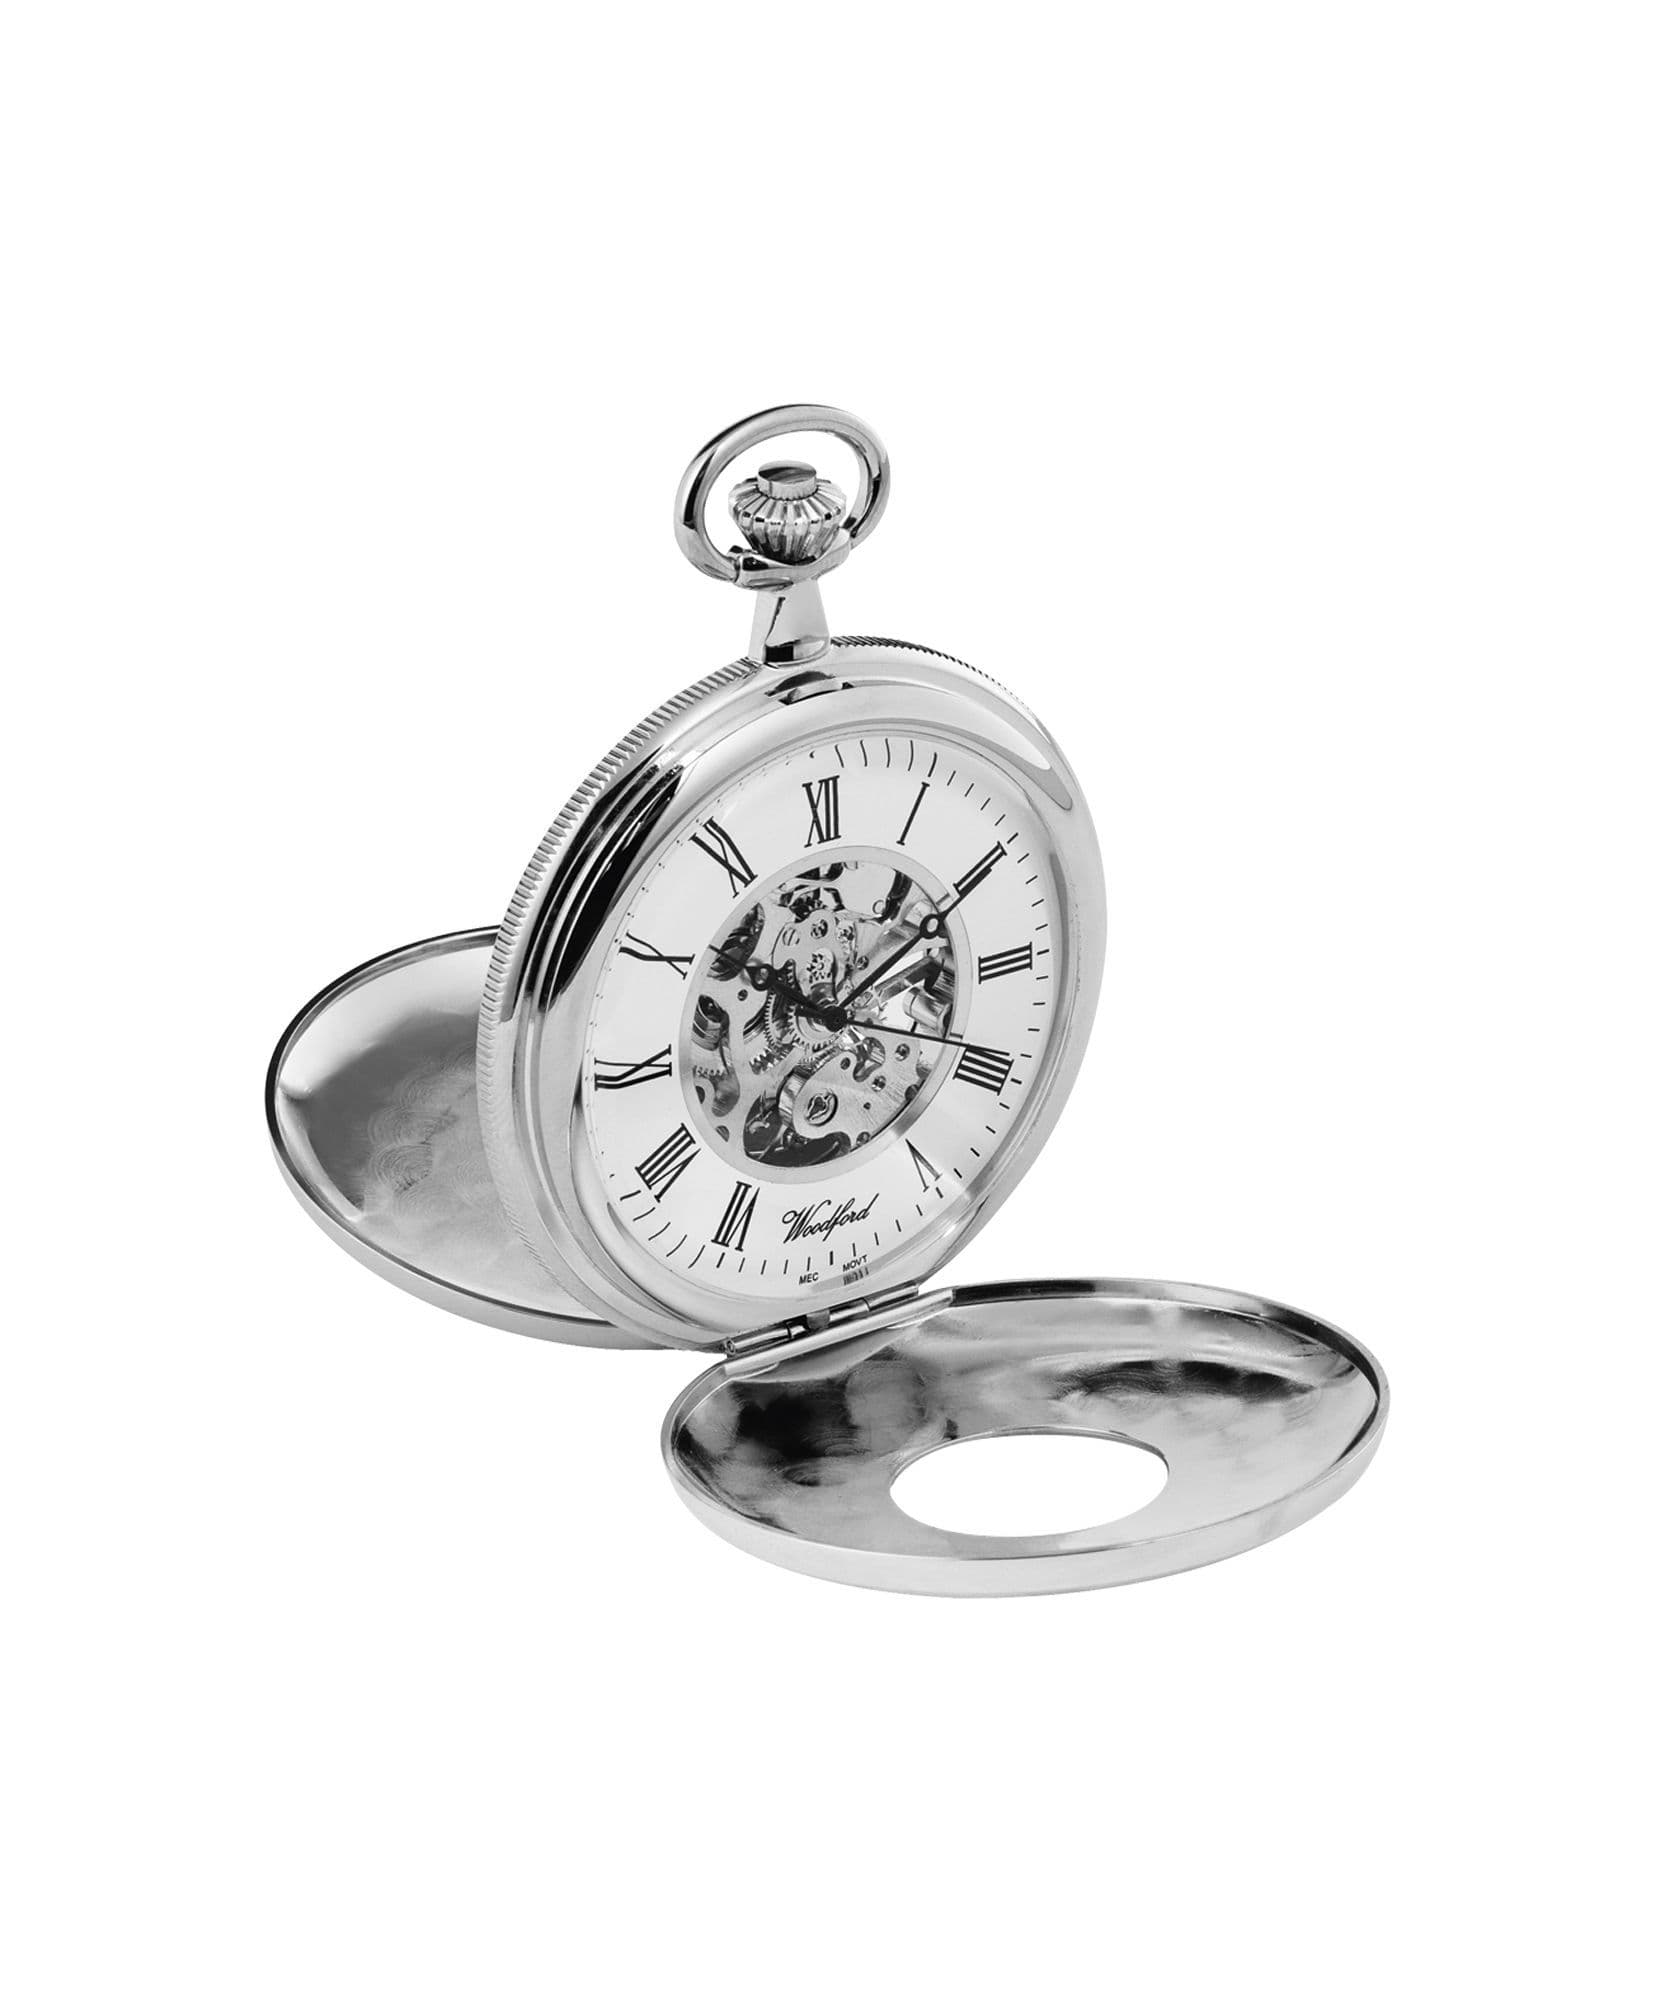 Mechanical Chrome Plated Half Hunter Patterned Pocket Watch With Chain